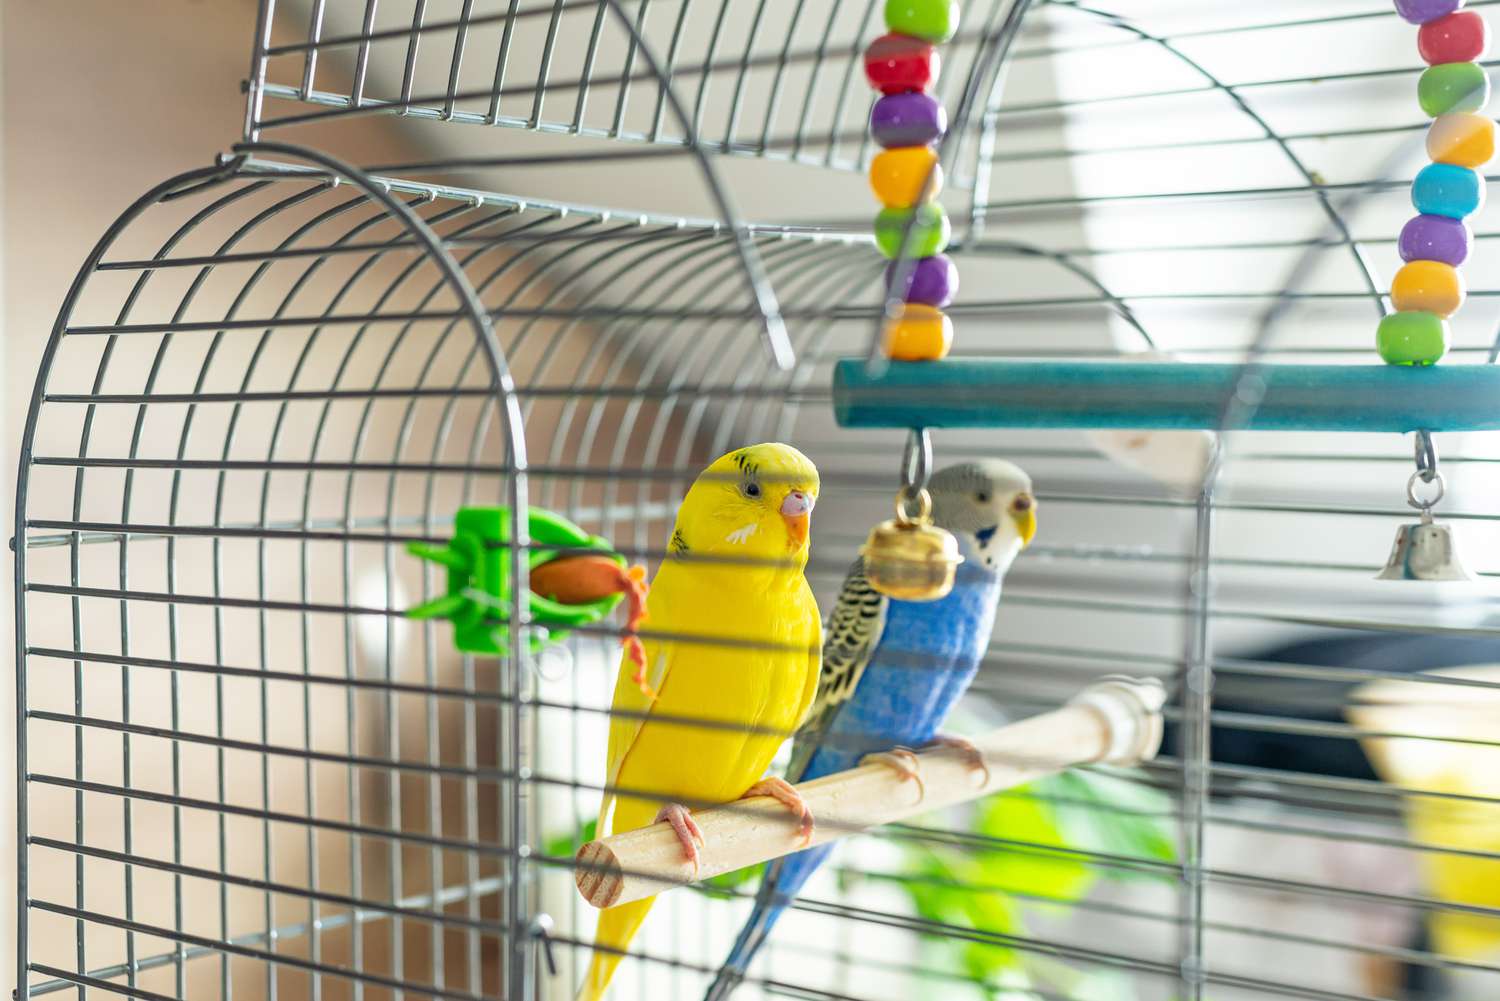 Why are round cages not good for birds?